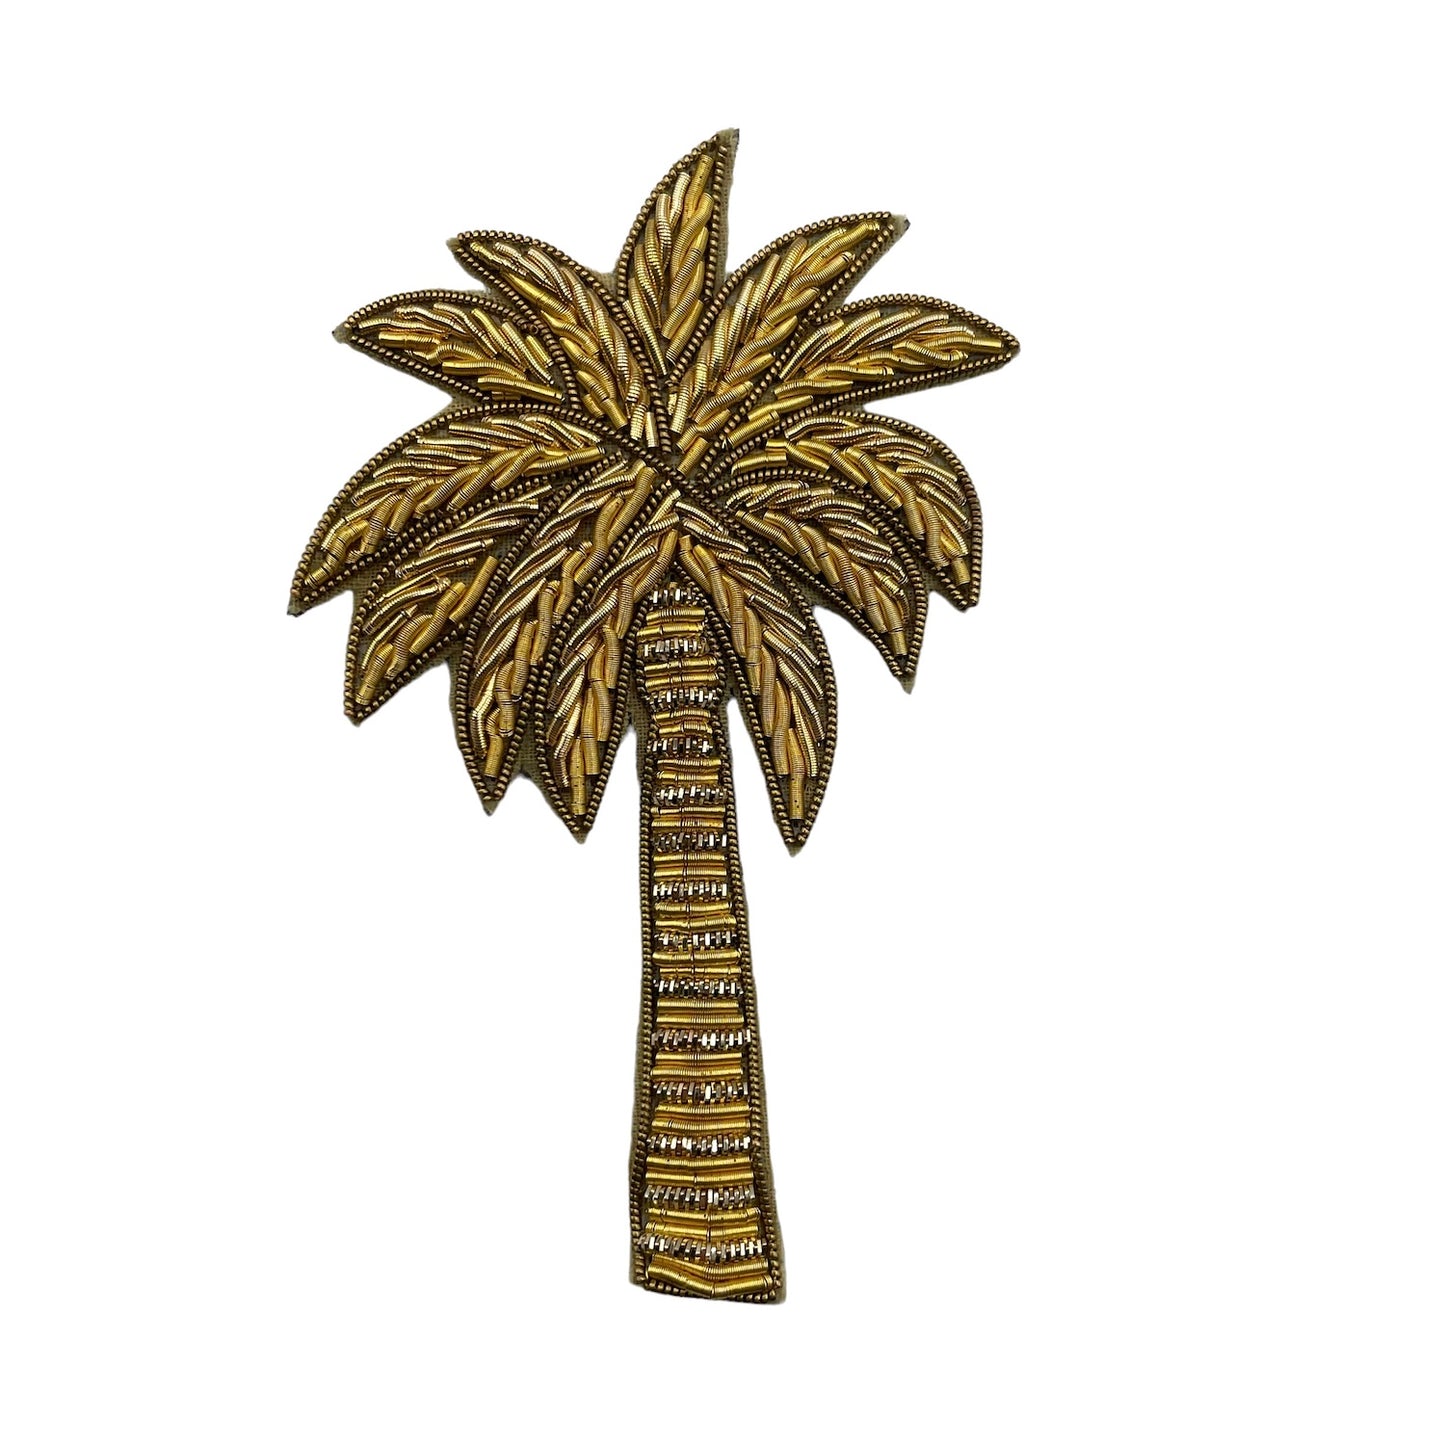 Sand palm large make-up bag & gold palm tree brooch - recycled velvet, large and small